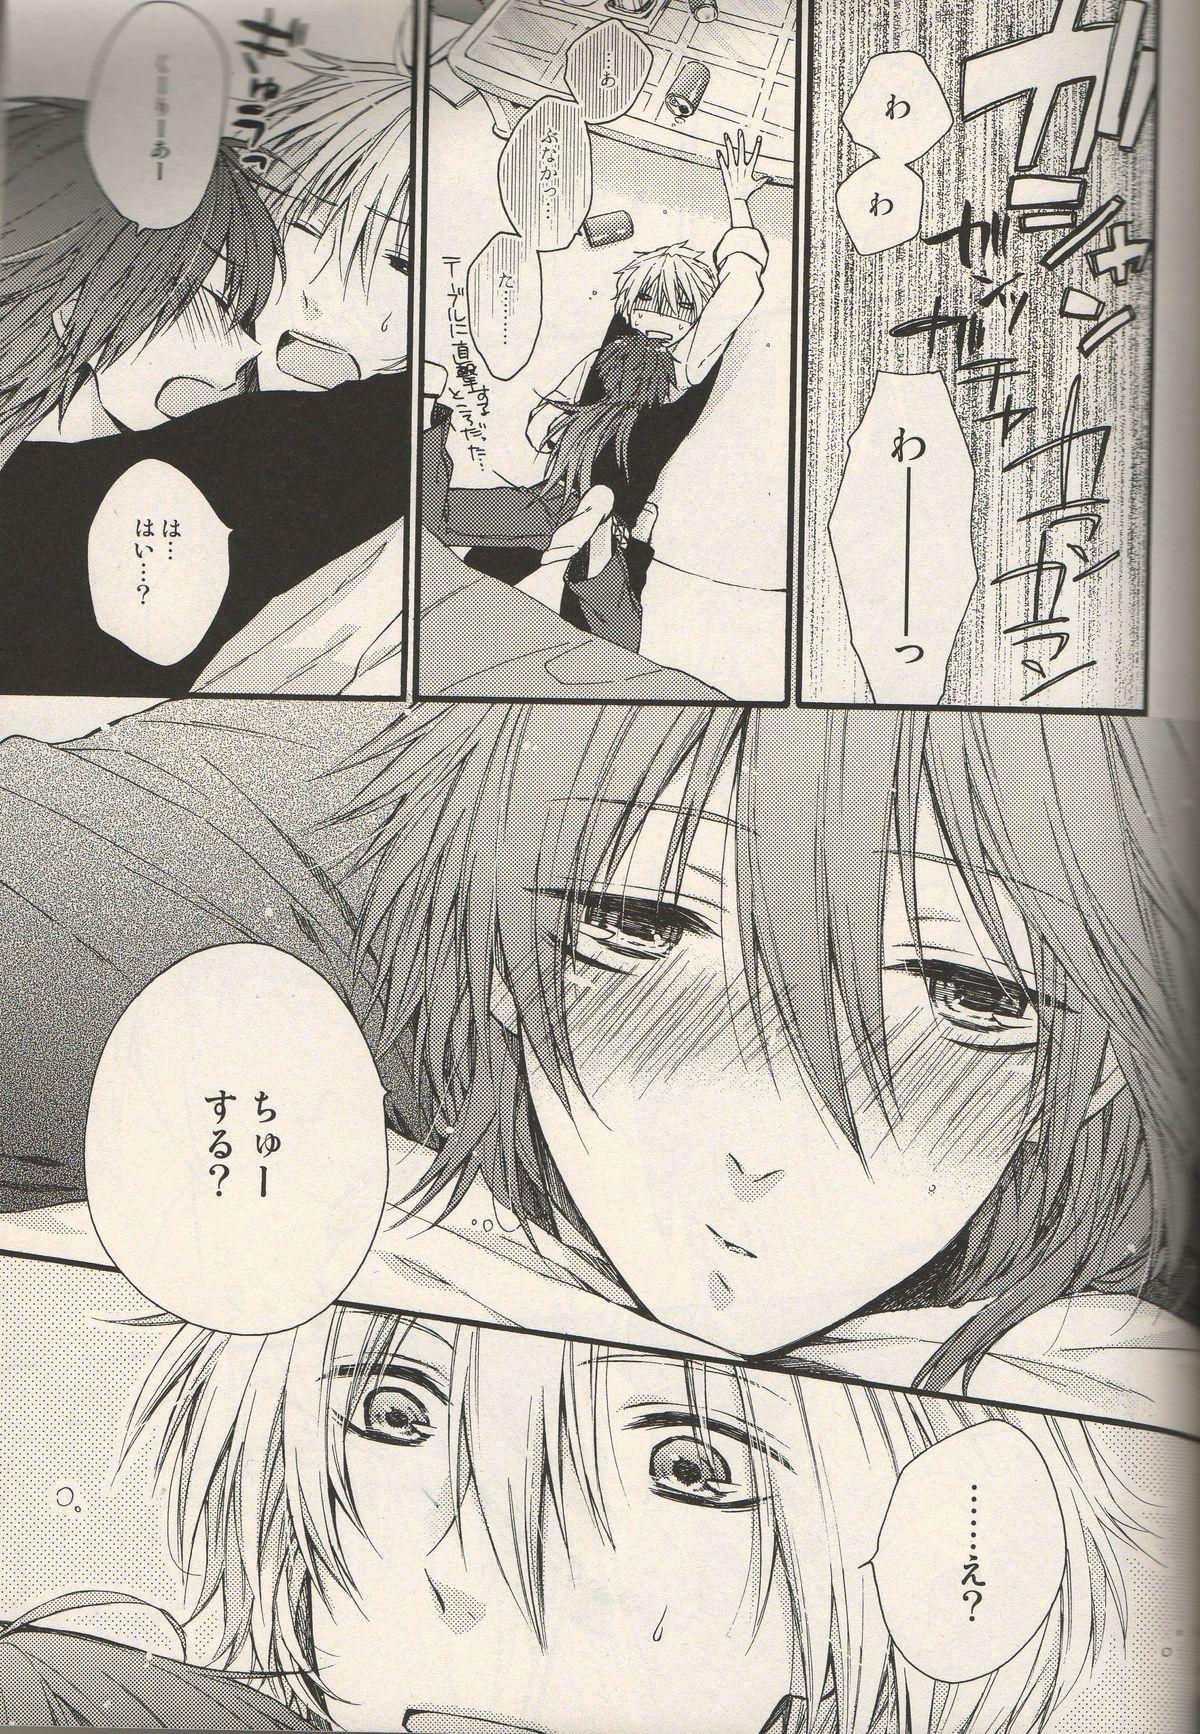 Xxx The Story About You - Dramatical murder Reverse Cowgirl - Page 7